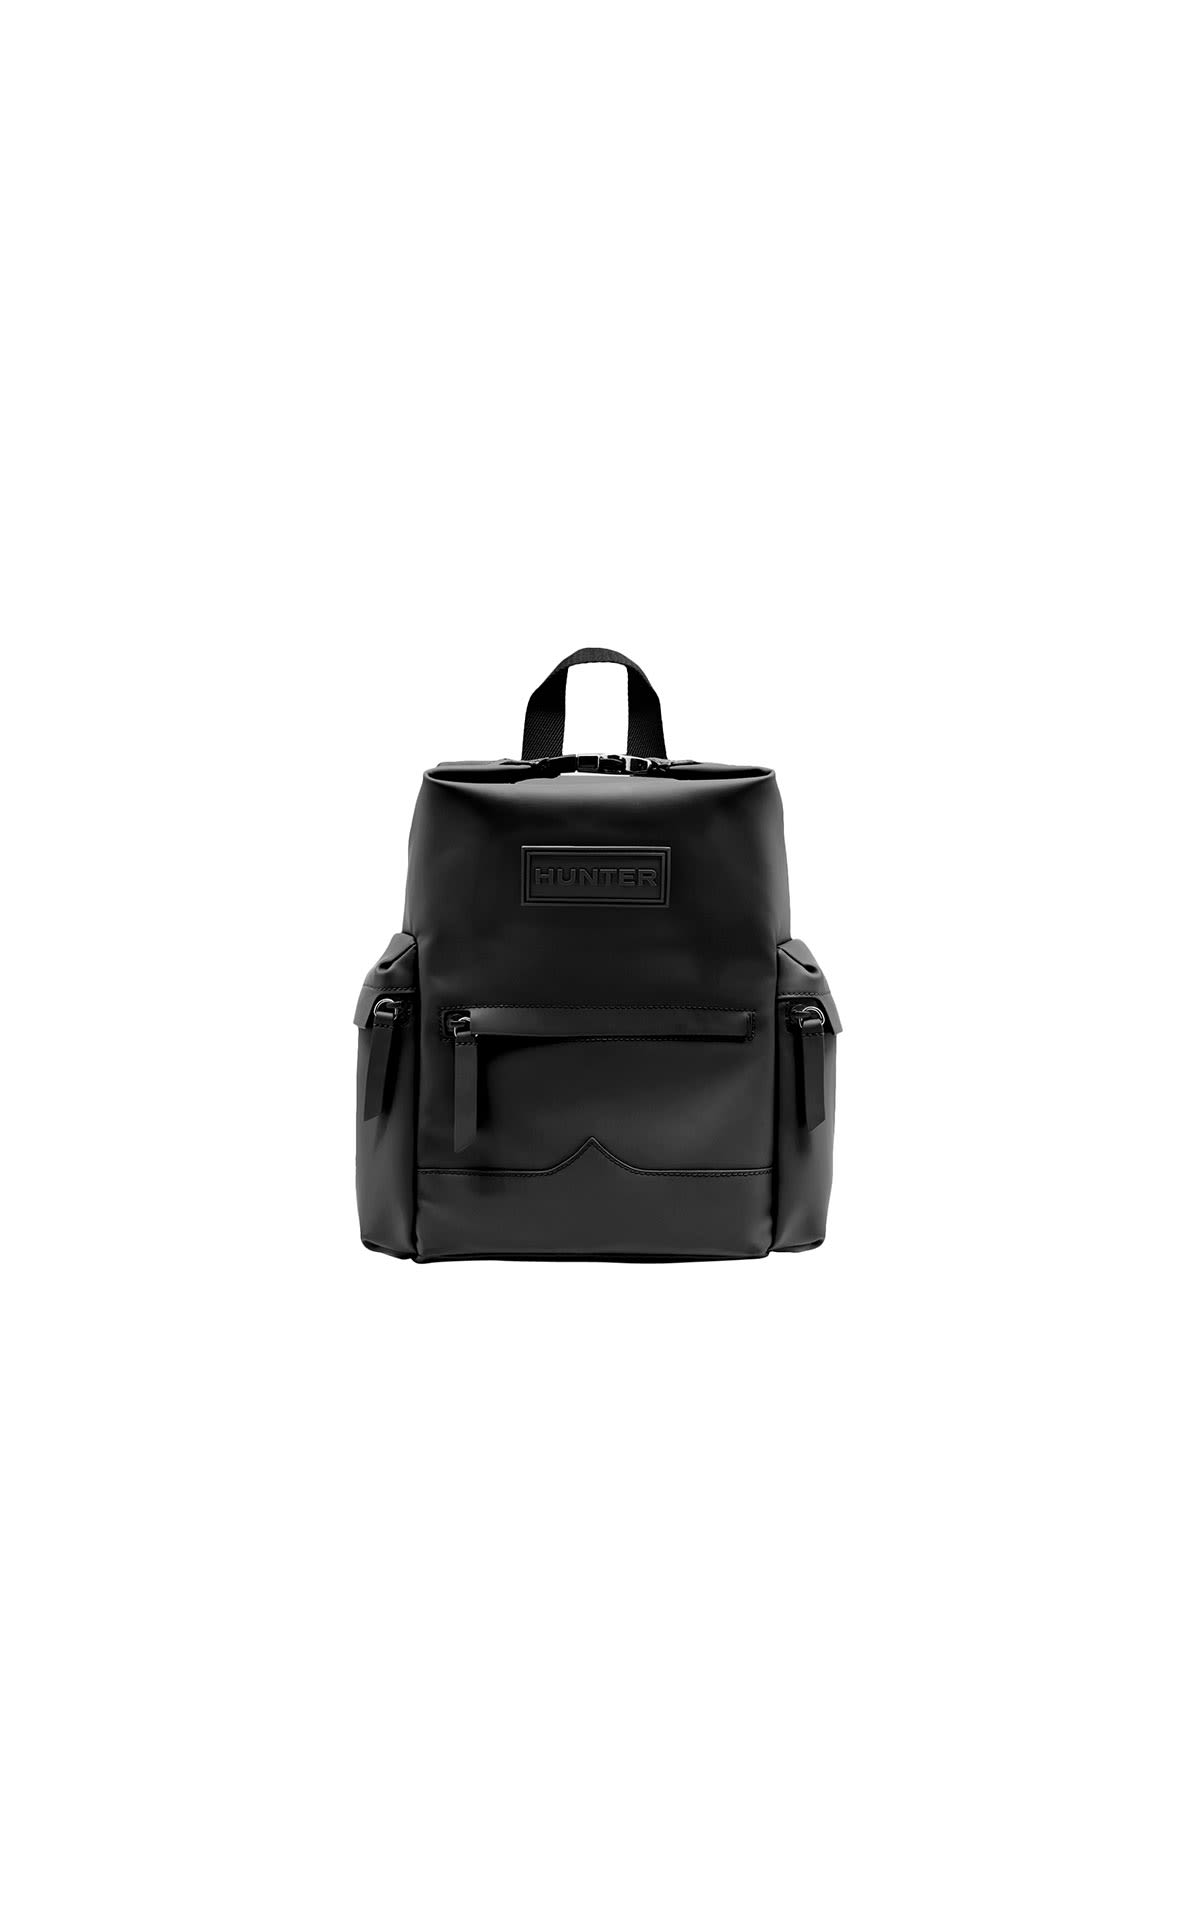 Hunter Original mini topclip backpack rubber leather from Bicester Village